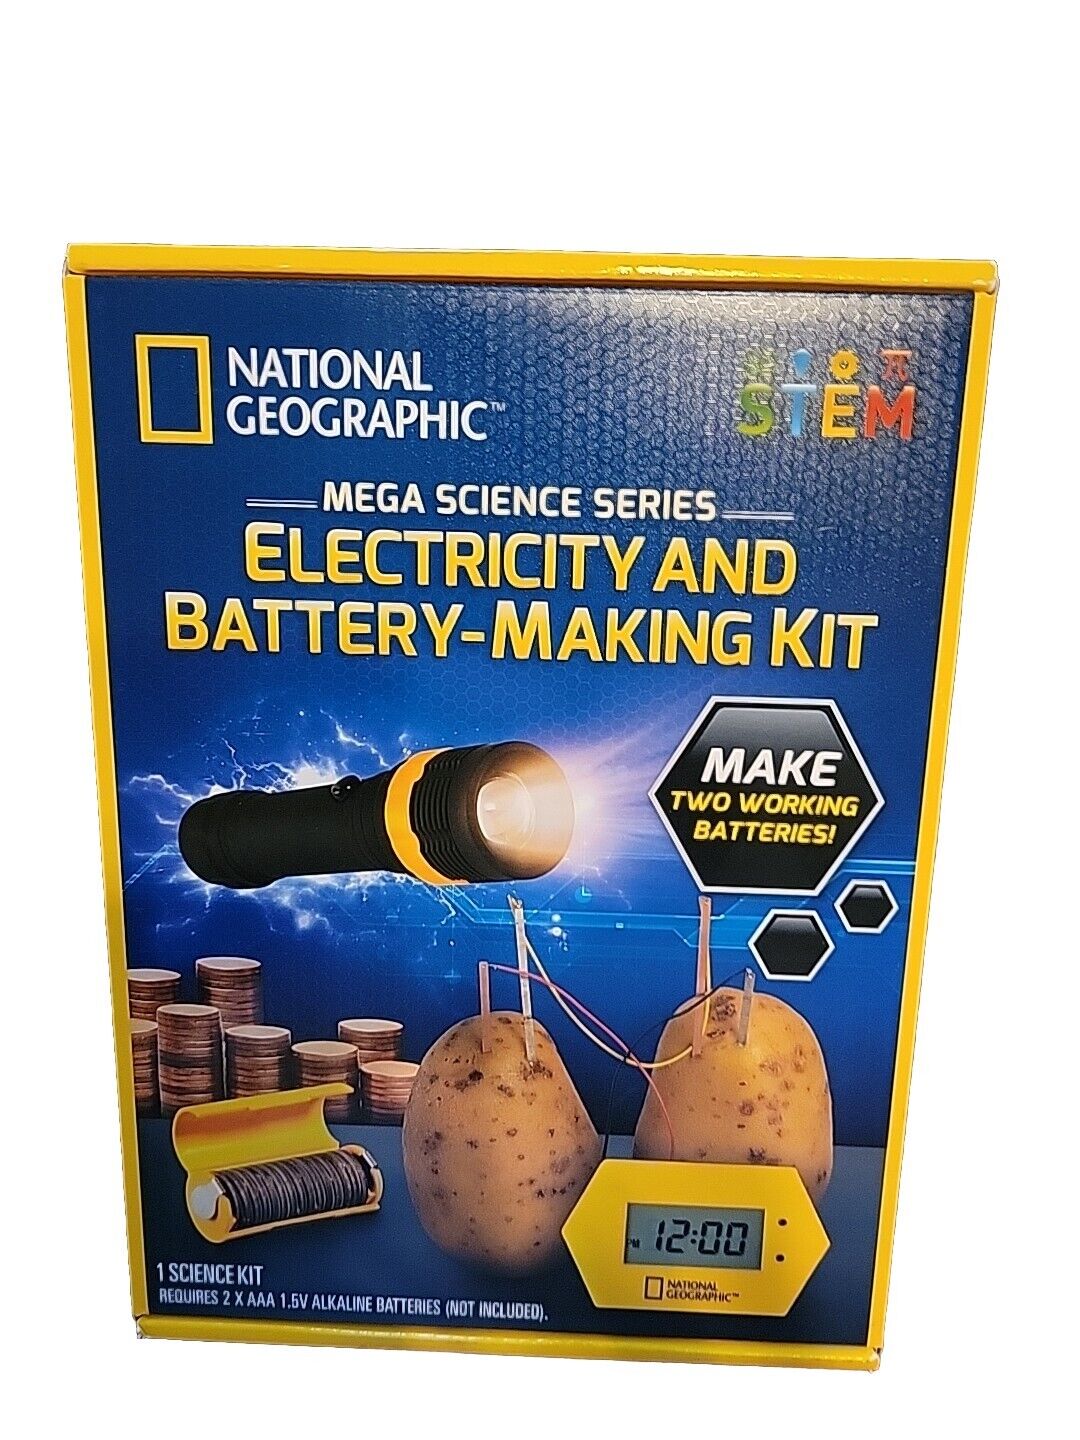 NATIONAL GEOGRAPHIC Mega Science Series Electricity & Battery Making Kit NEW